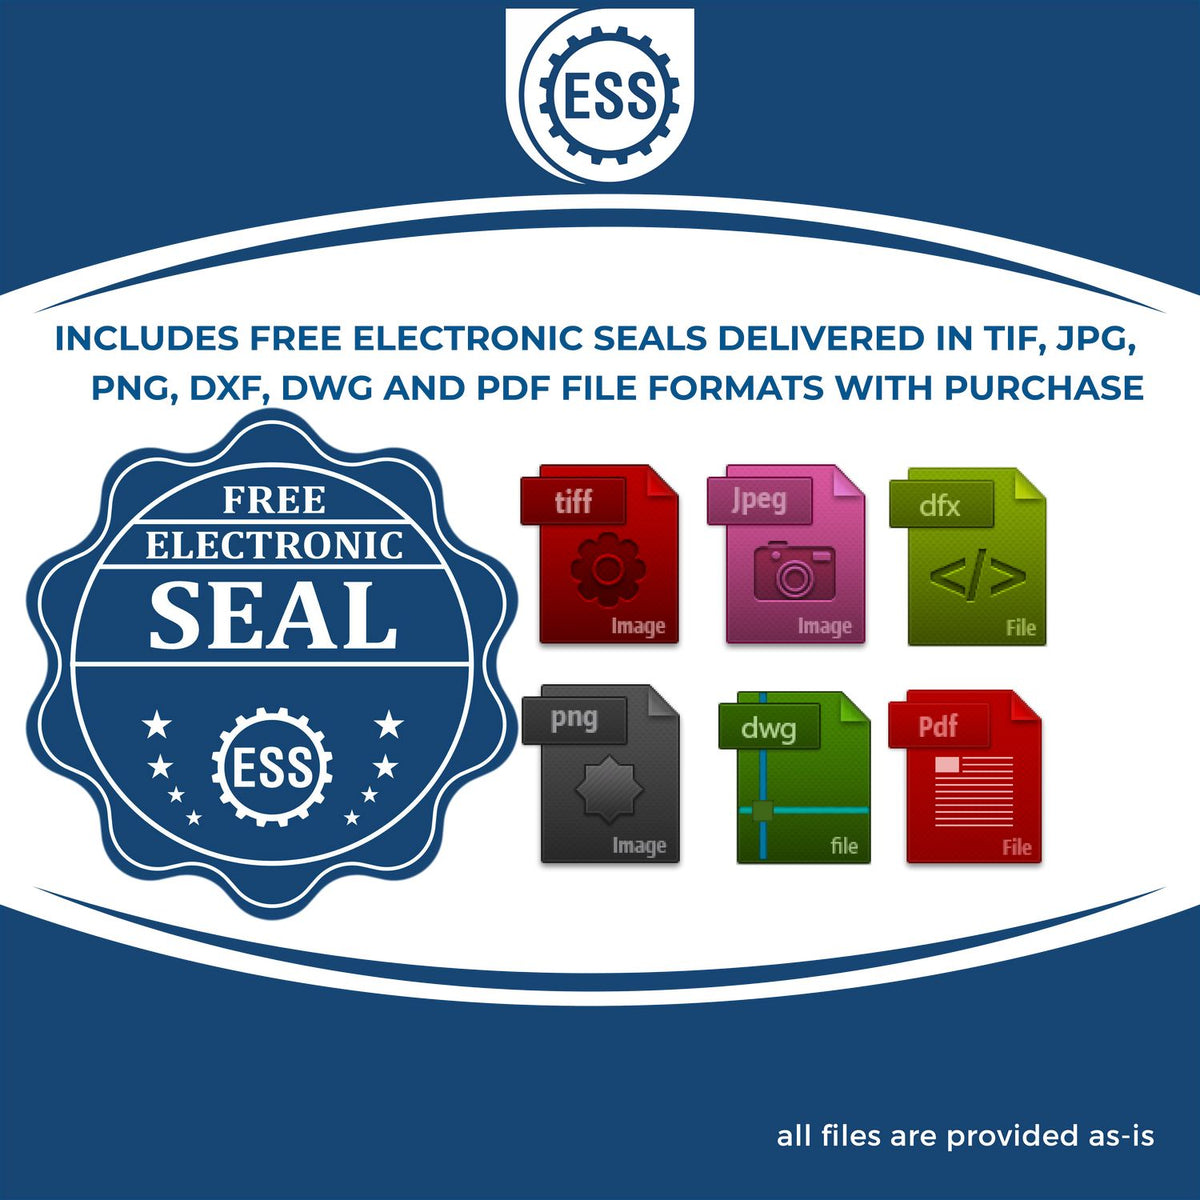 An infographic for the free electronic seal for the Texas Professional Engineer Seal Stamp illustrating the different file type icons such as DXF, DWG, TIF, JPG and PNG.